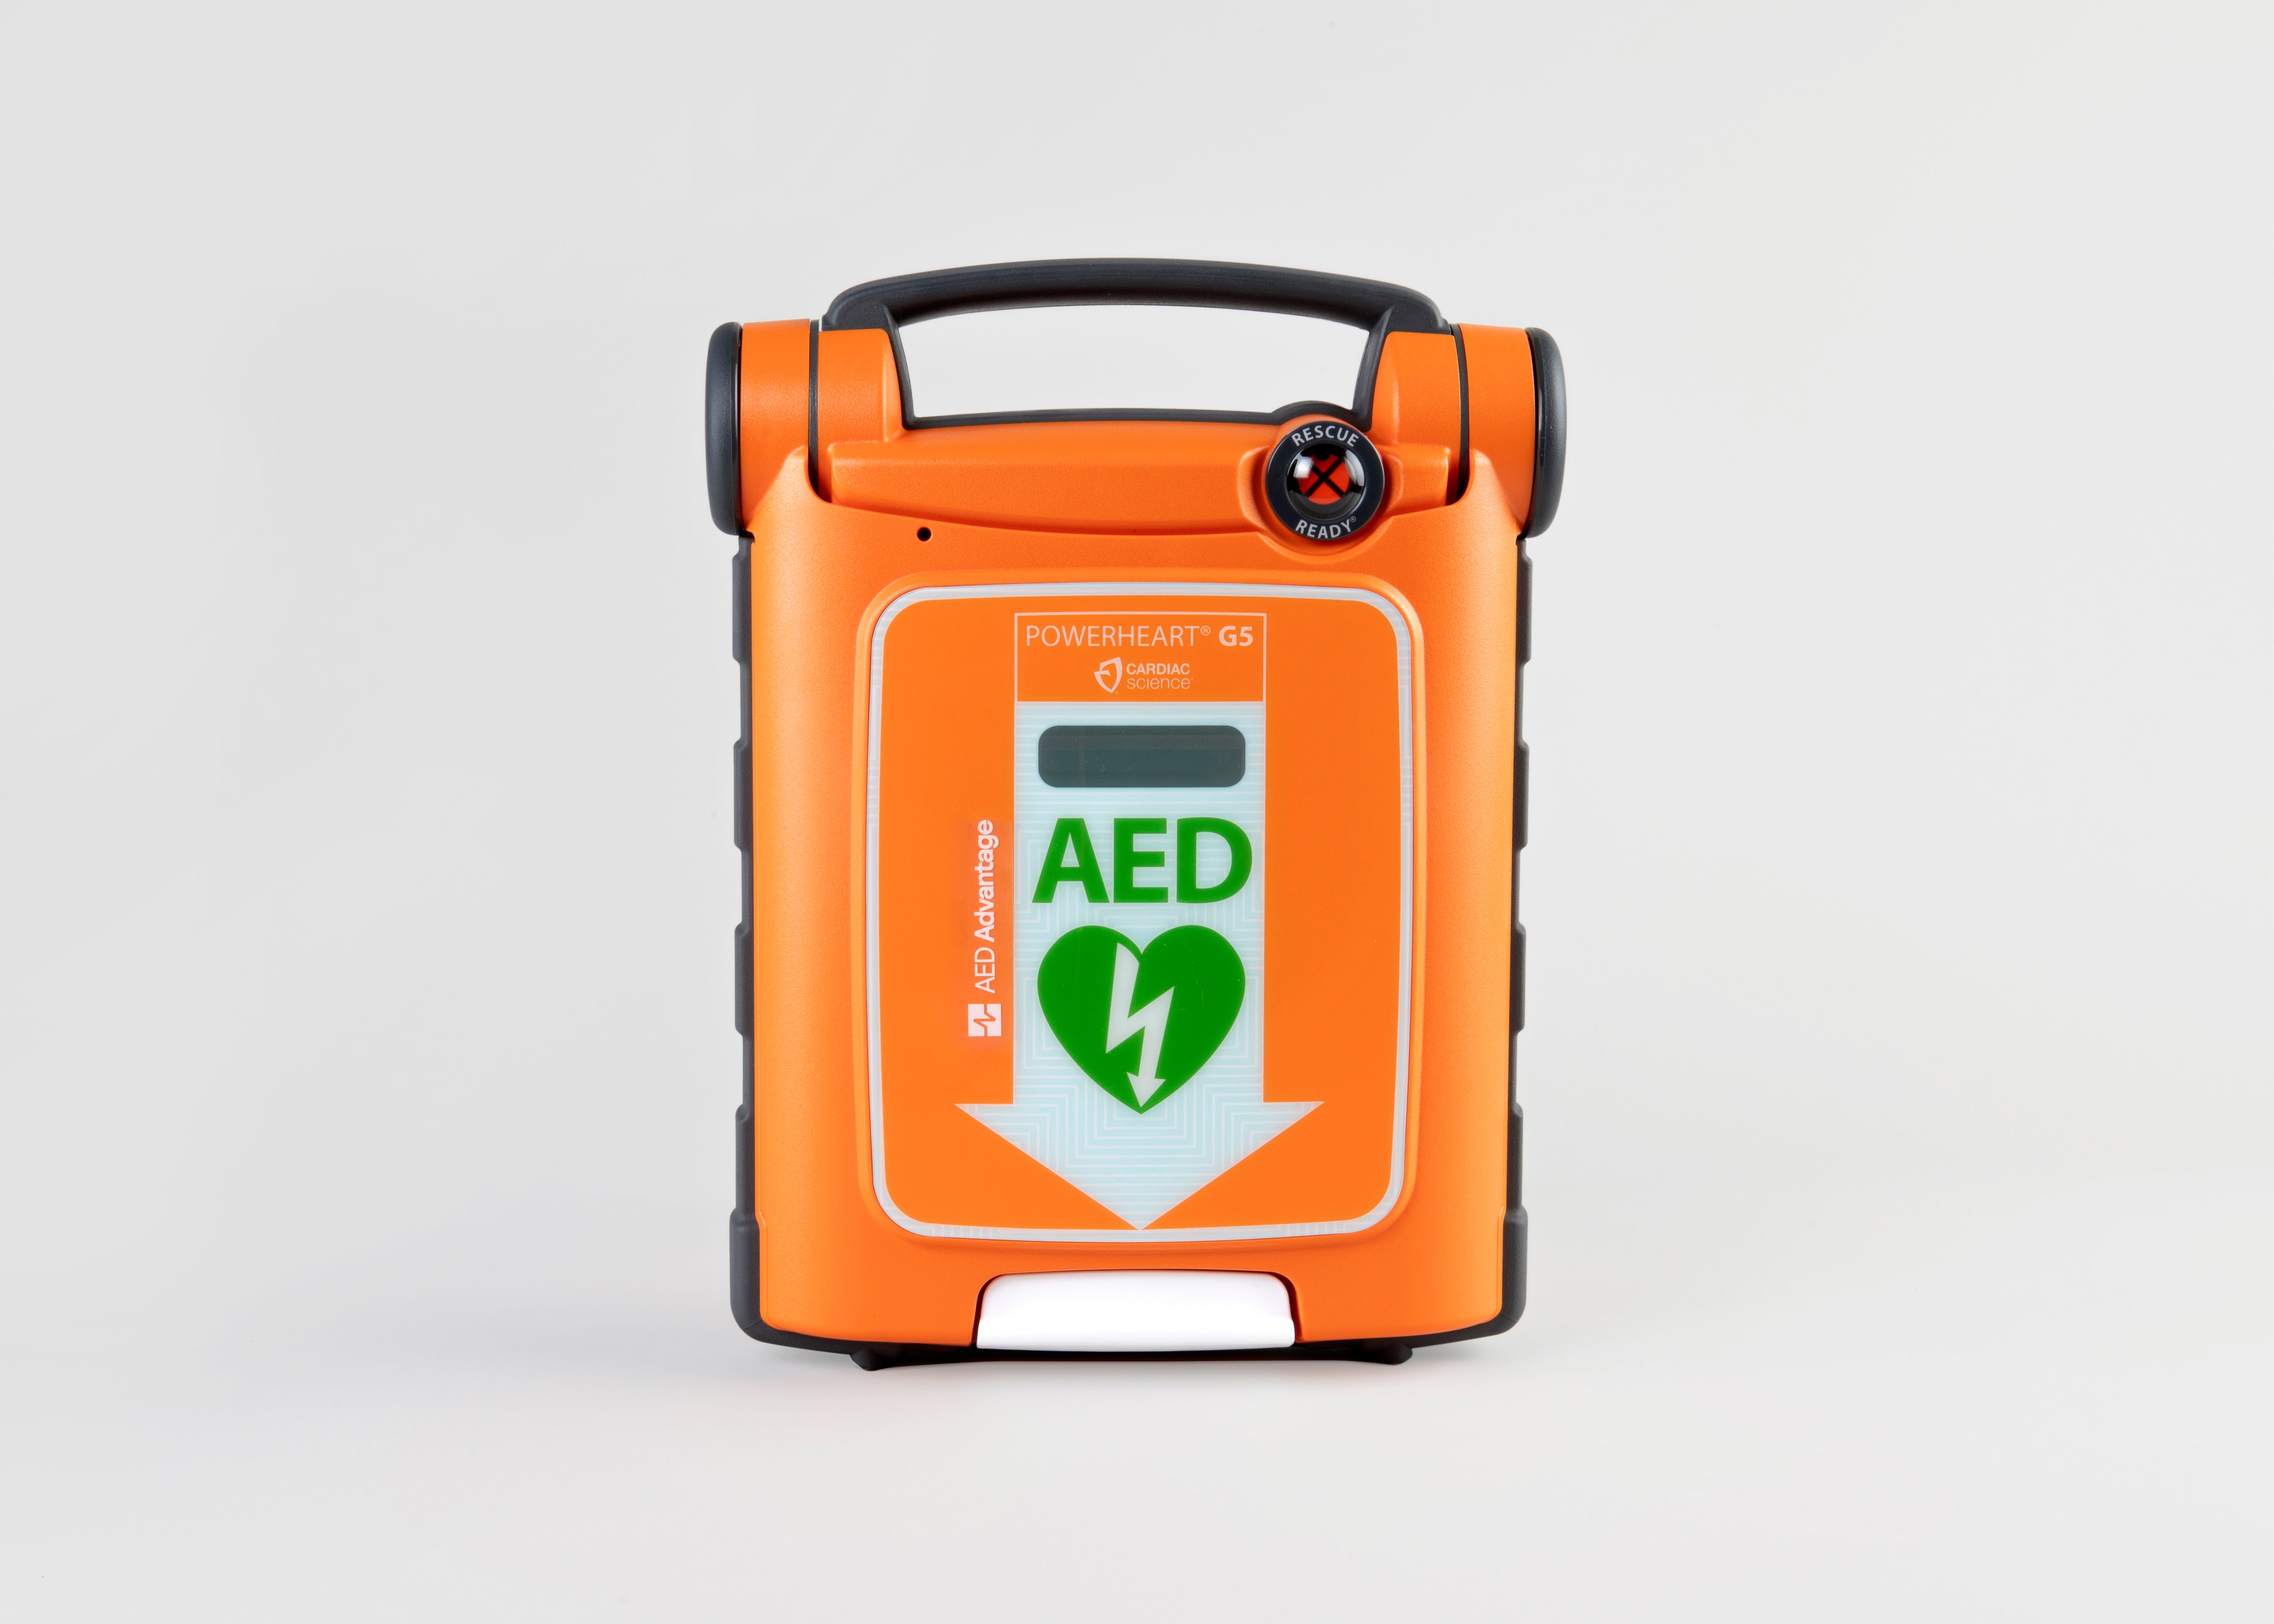 An orange Powerheart G5 AED with a dark gray carry handle